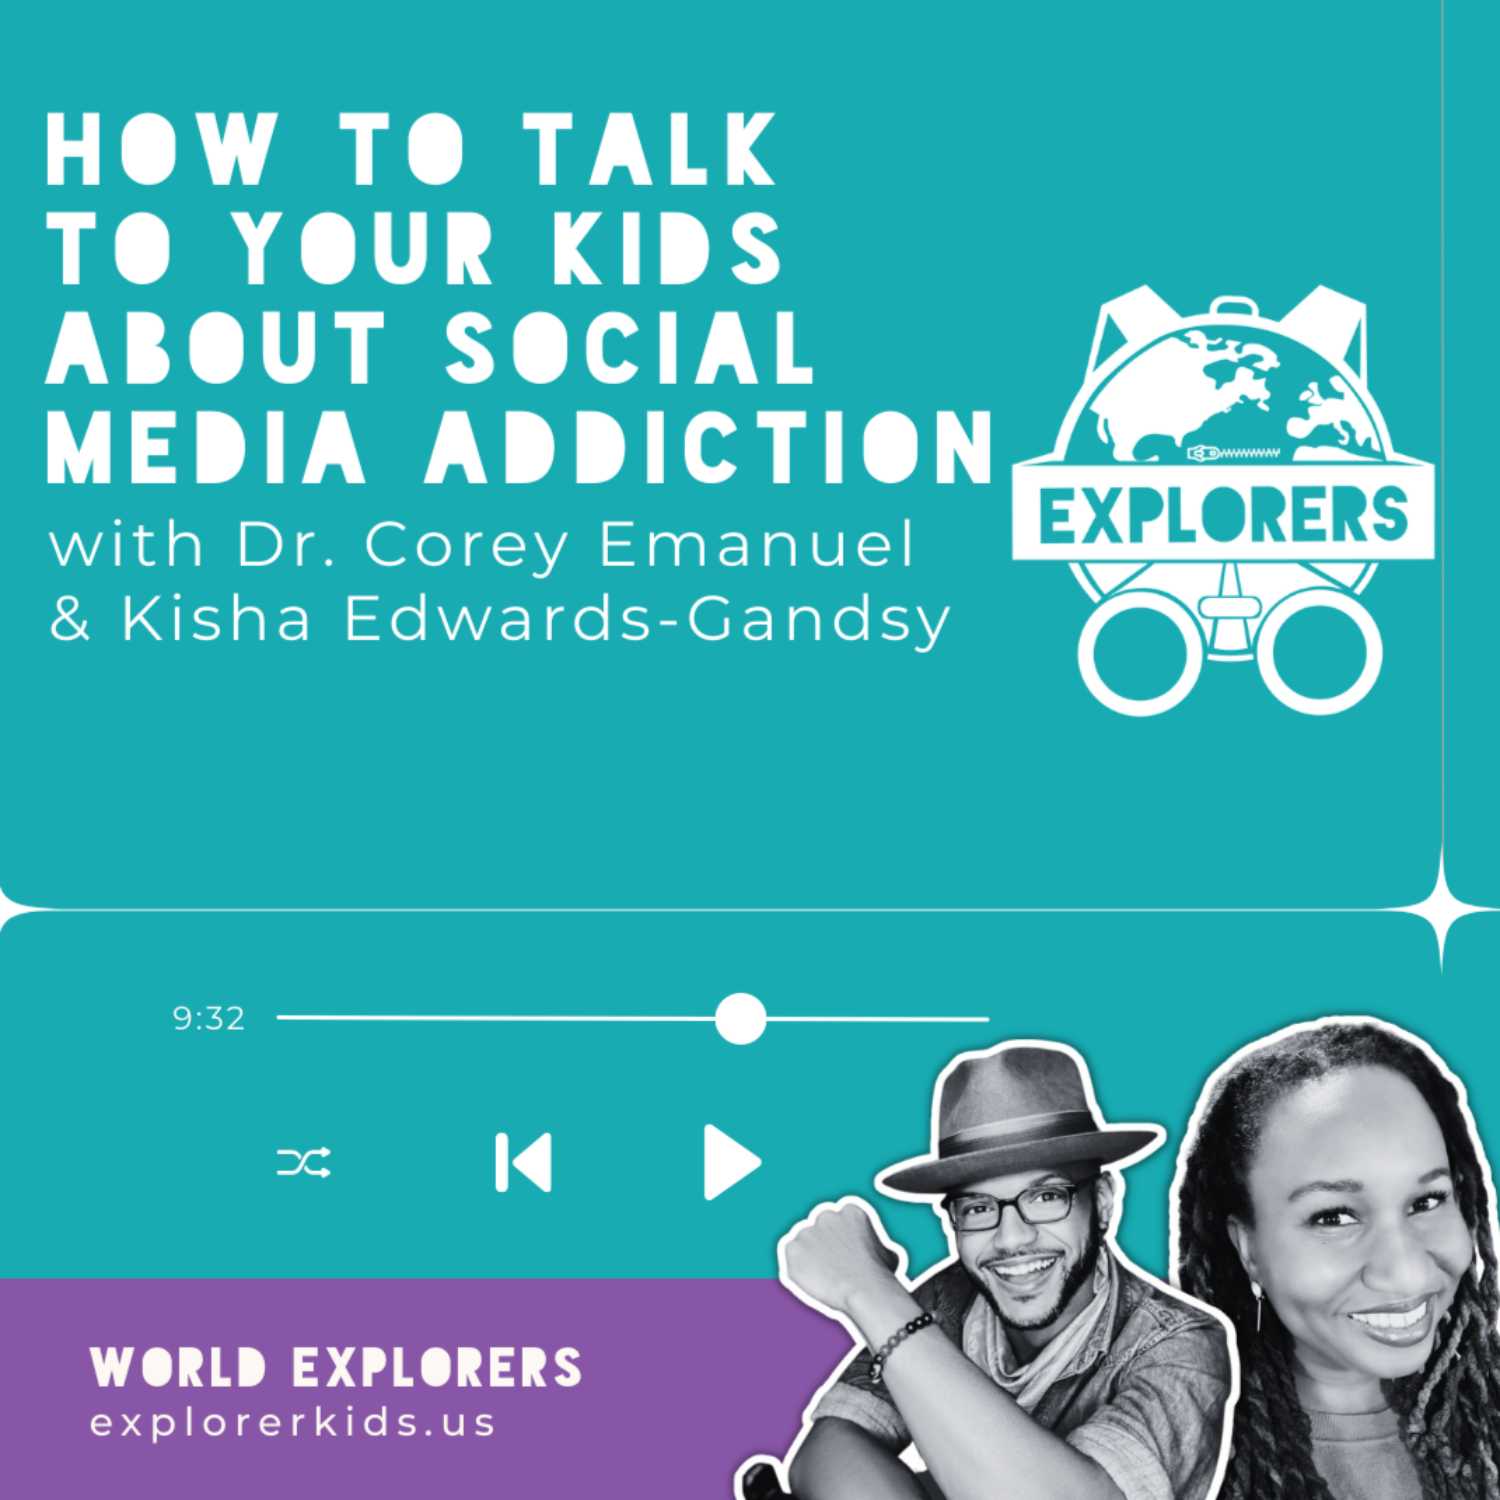 How to Talk to Your Kids About Social Media Addiction